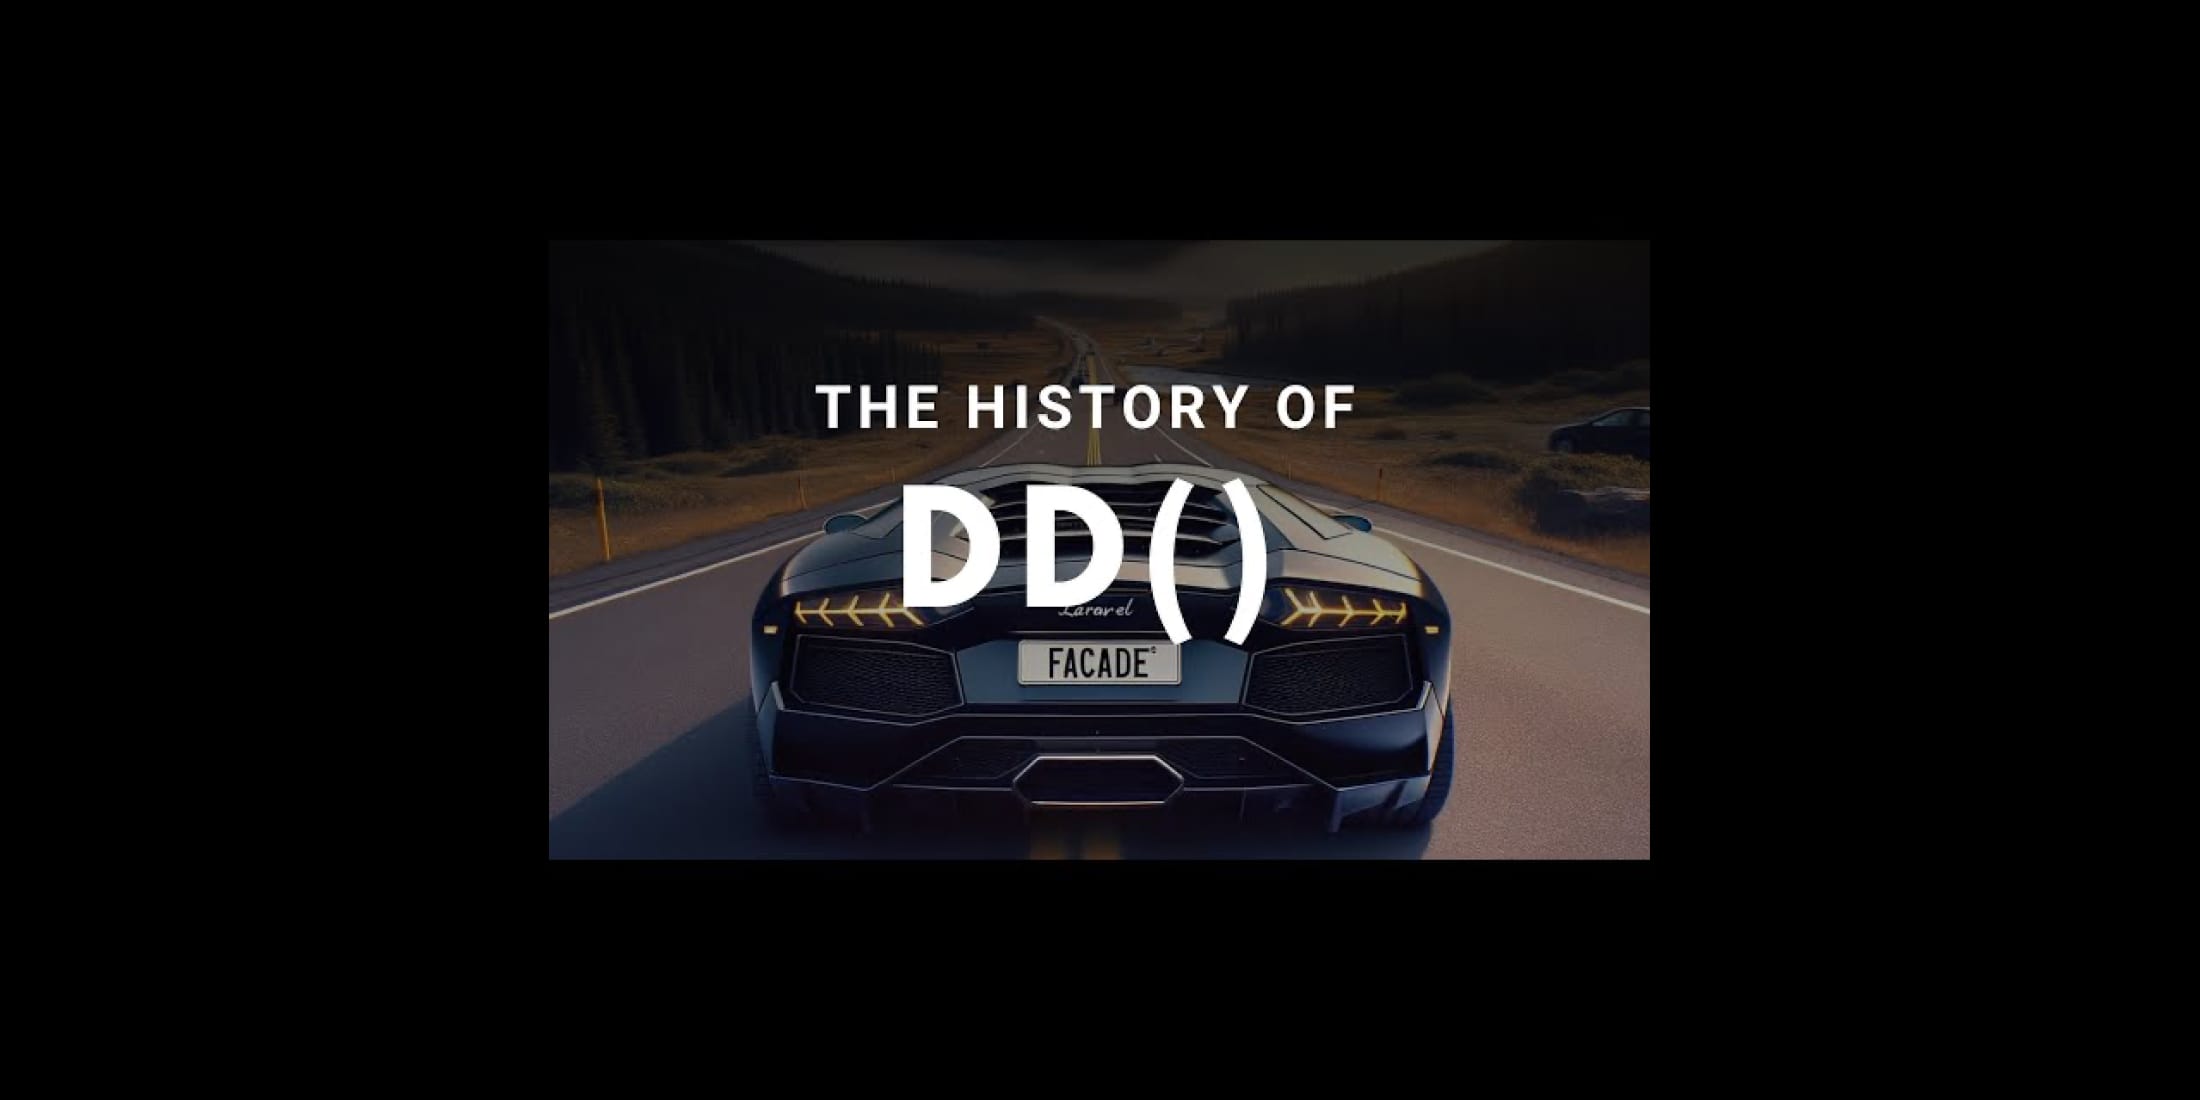 The history of Laravel's dd function image